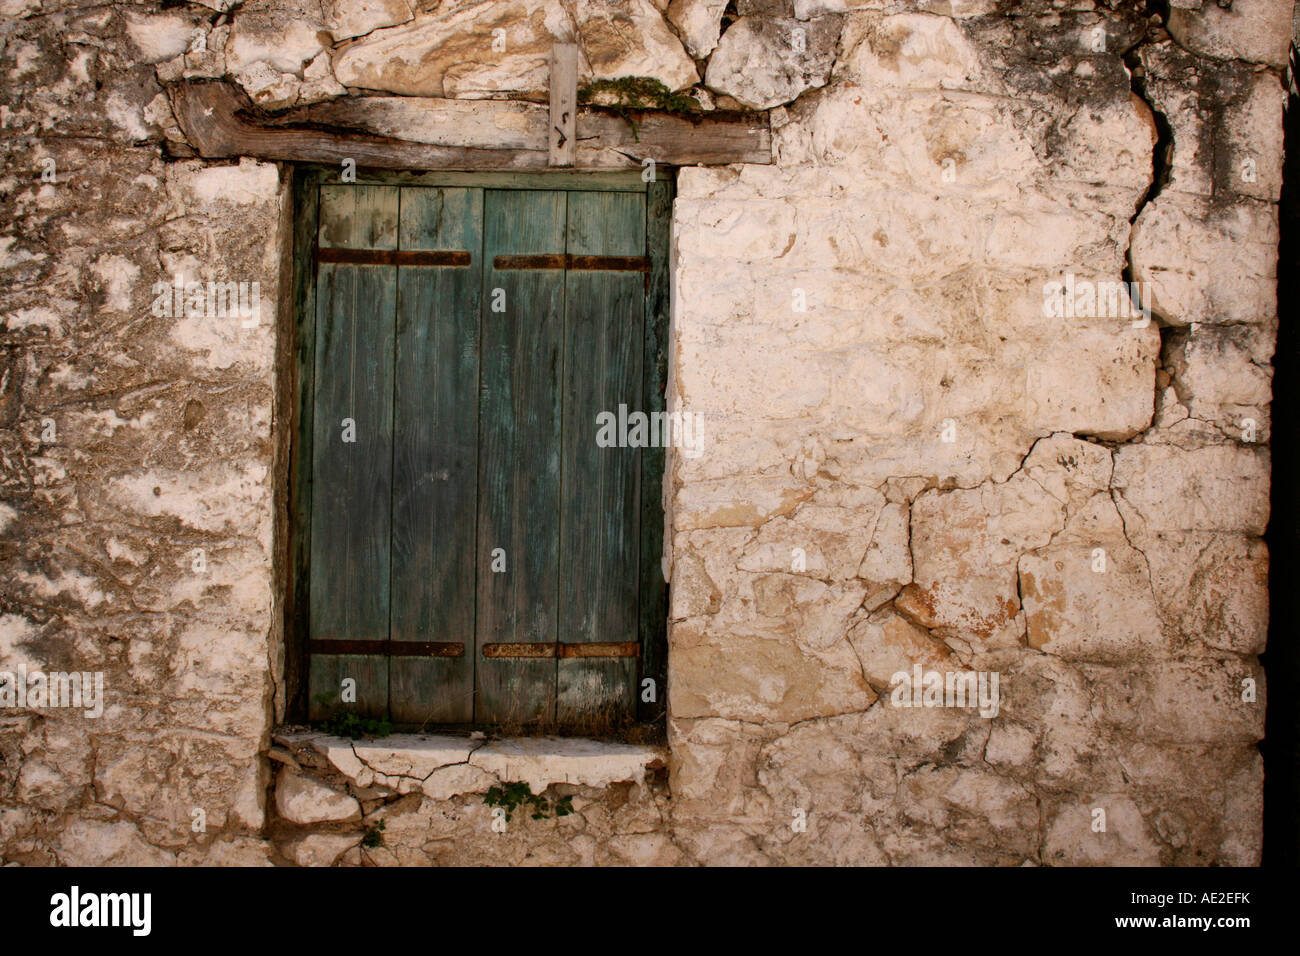 Green shutter over window with cracked stonework Karia Lefkas Greece Stock Photo